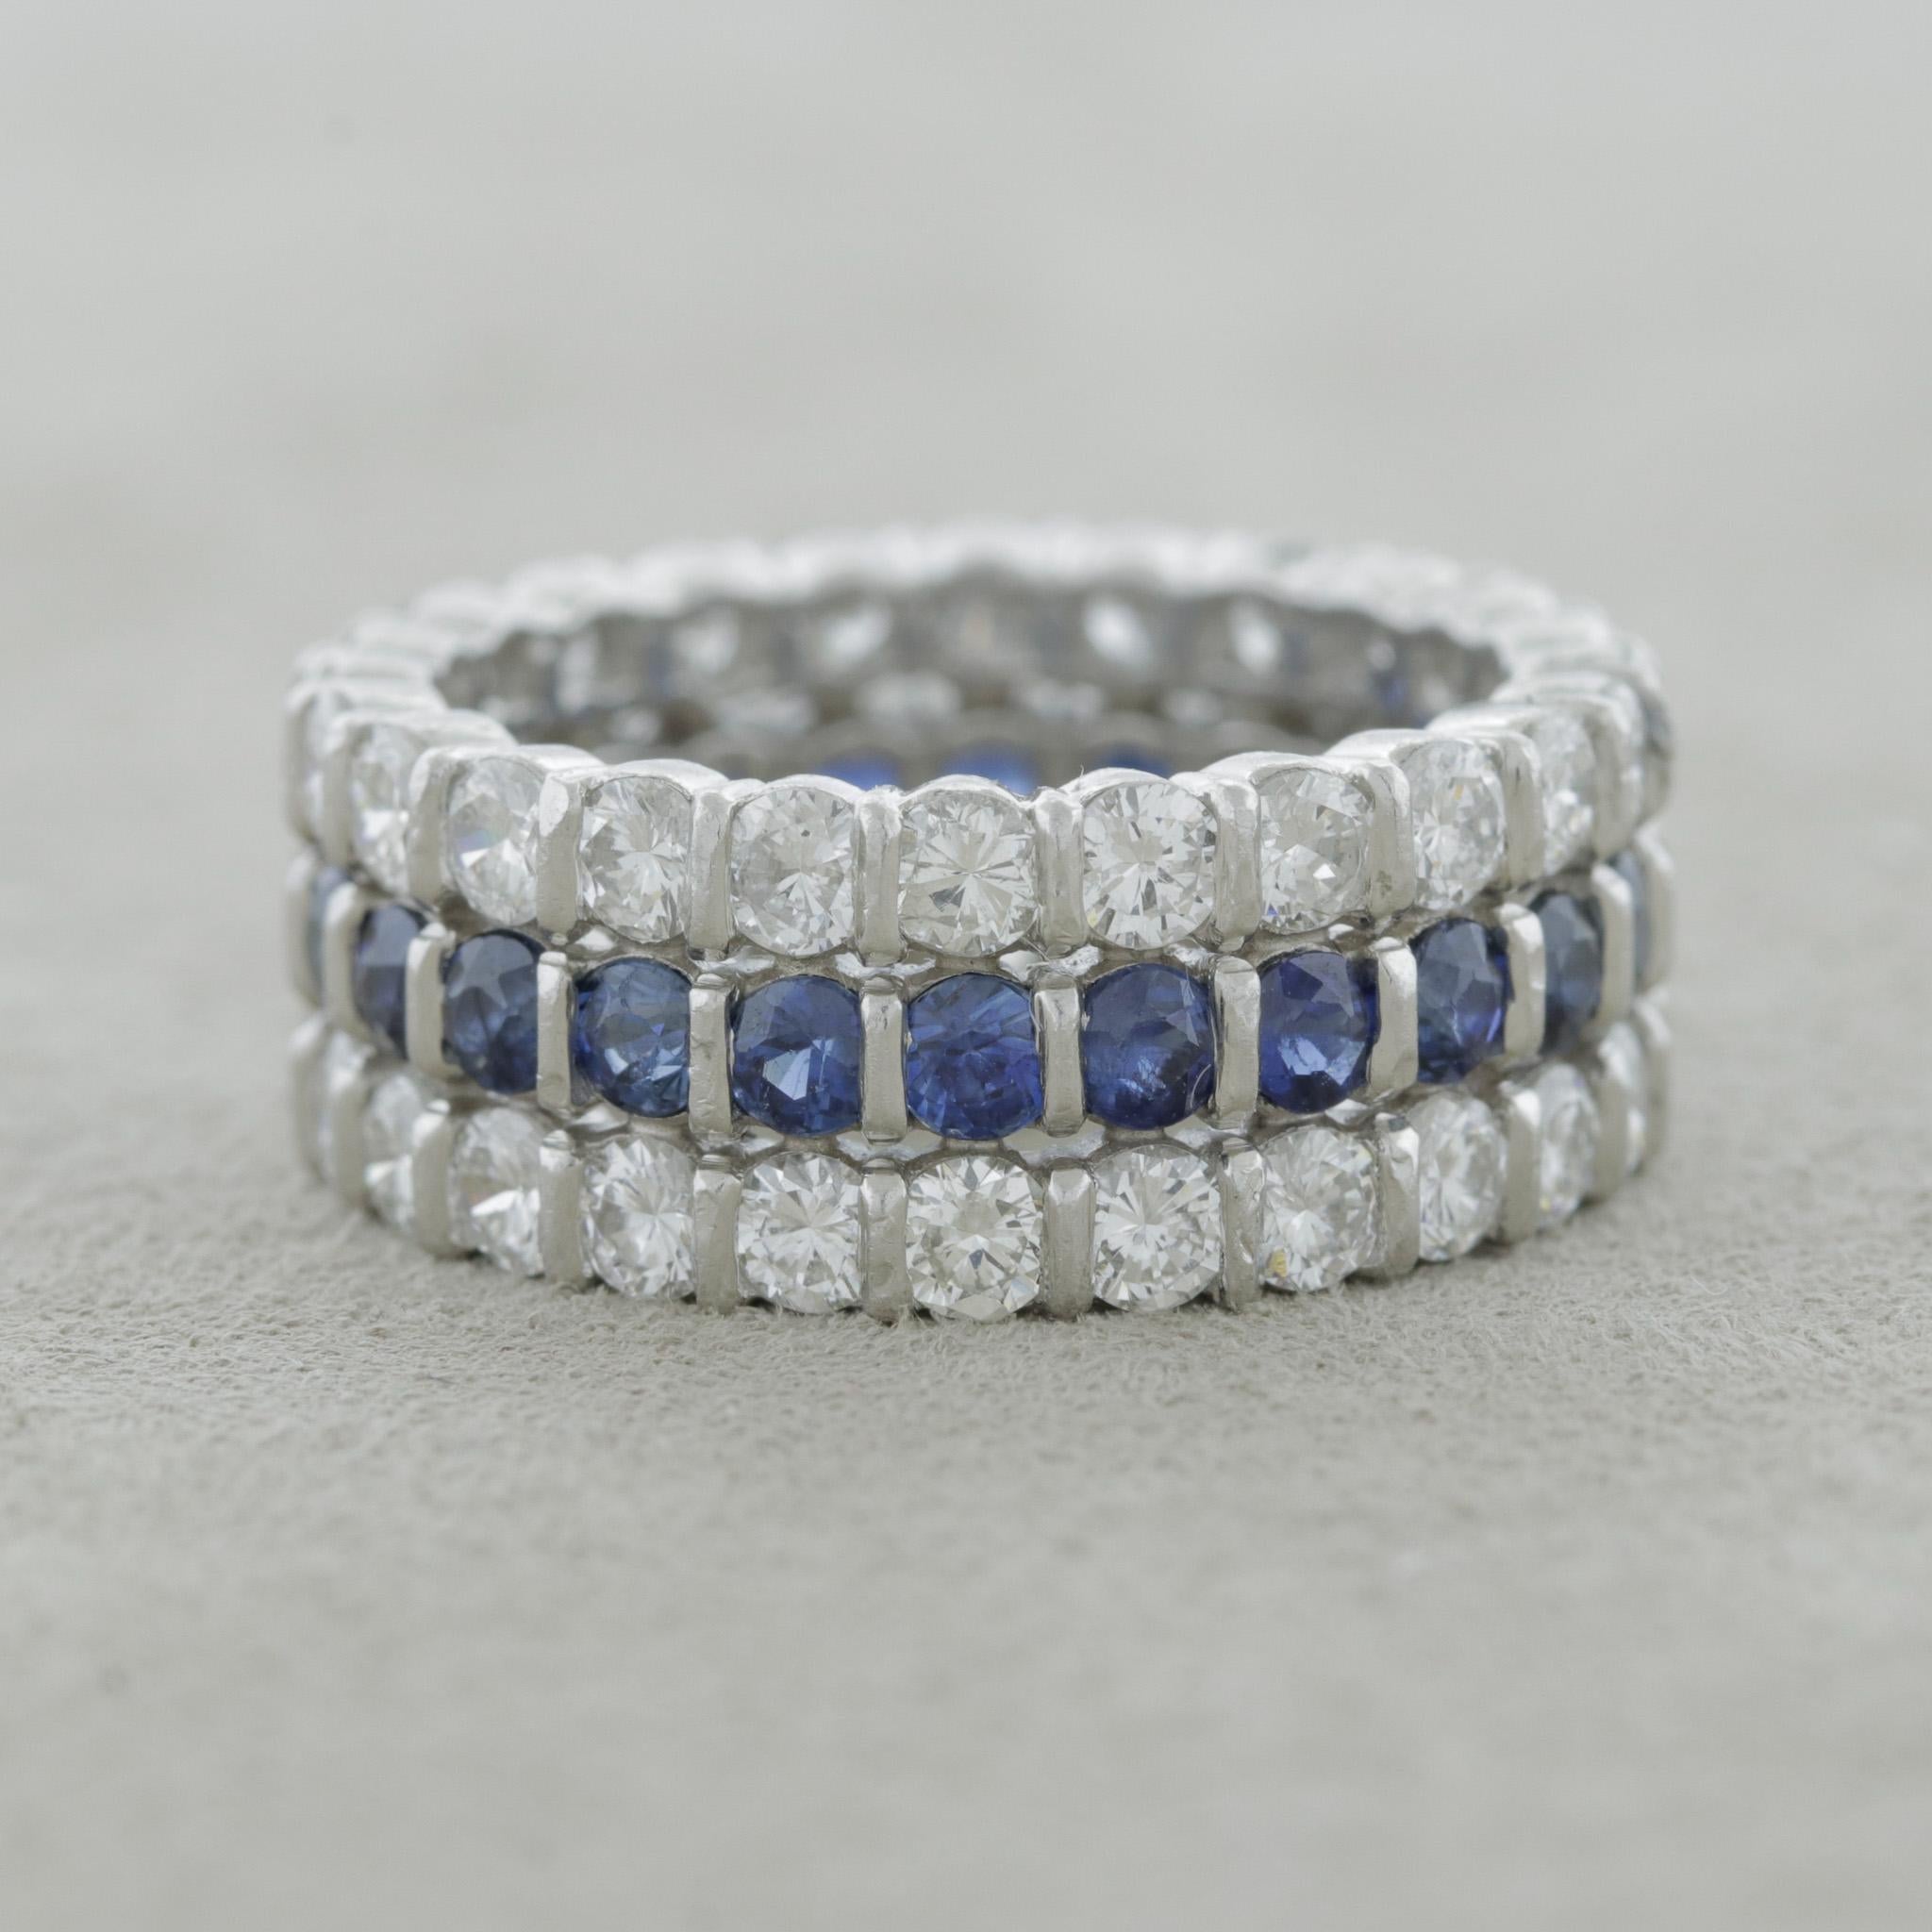 A sleek and chic eternity band featuring two rows of round brilliant-cut diamonds, weighing 2 carats, along a single row of bright blue sapphire between the diamonds weighing 1.40 carats. Hand-fabricated in platinum, a slightly wider eternity band